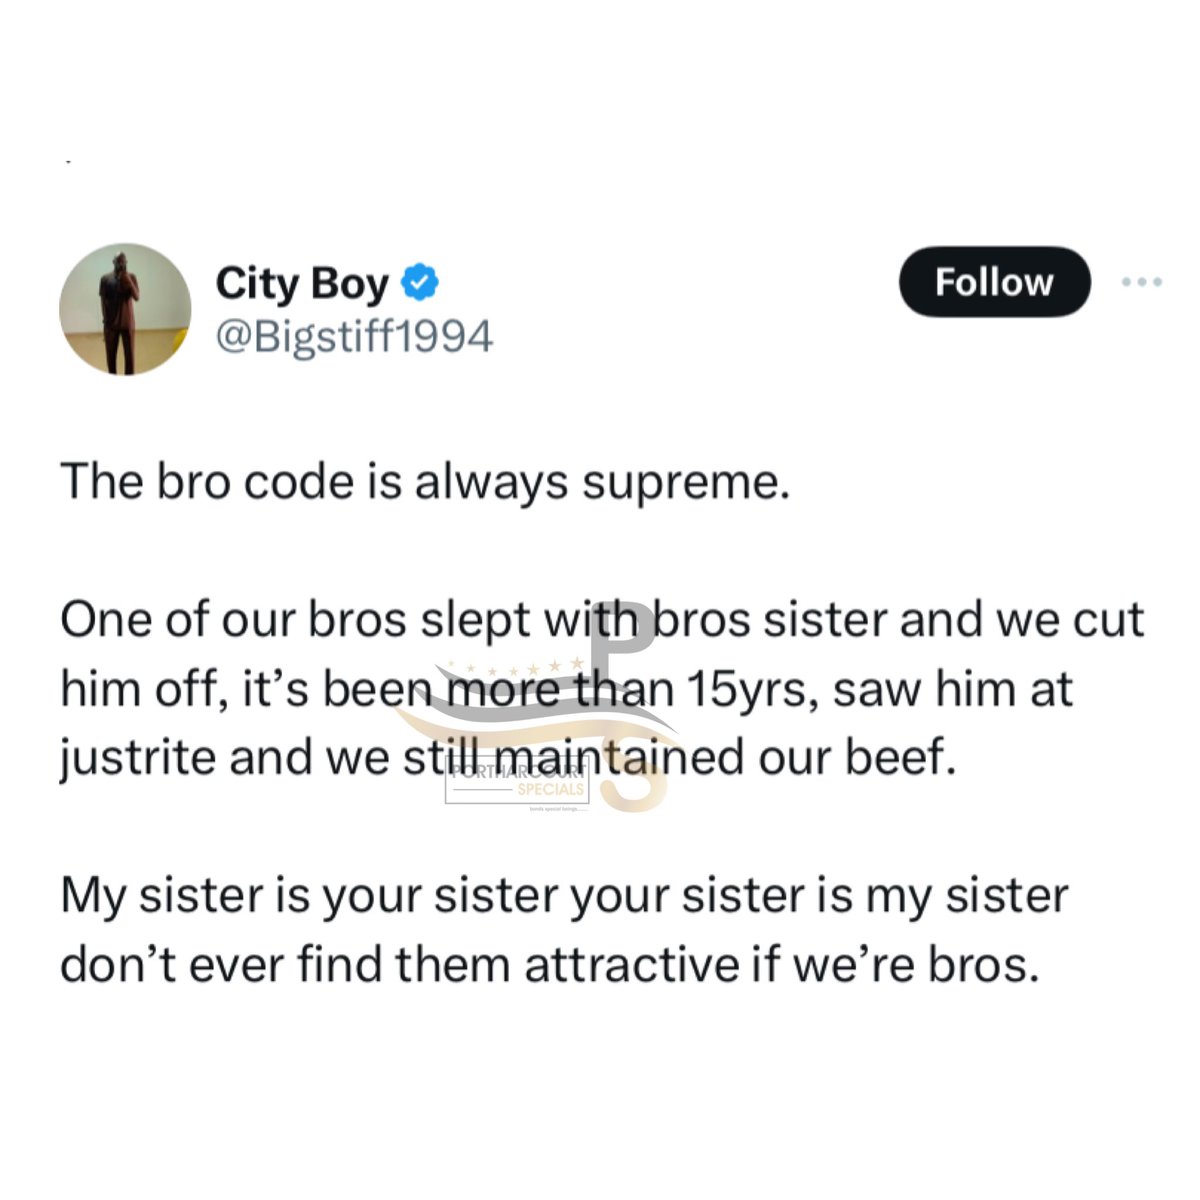 “My sister is your sister, don’t find her attractive if we are bros…”- Man shares why the Bro Code is supreme